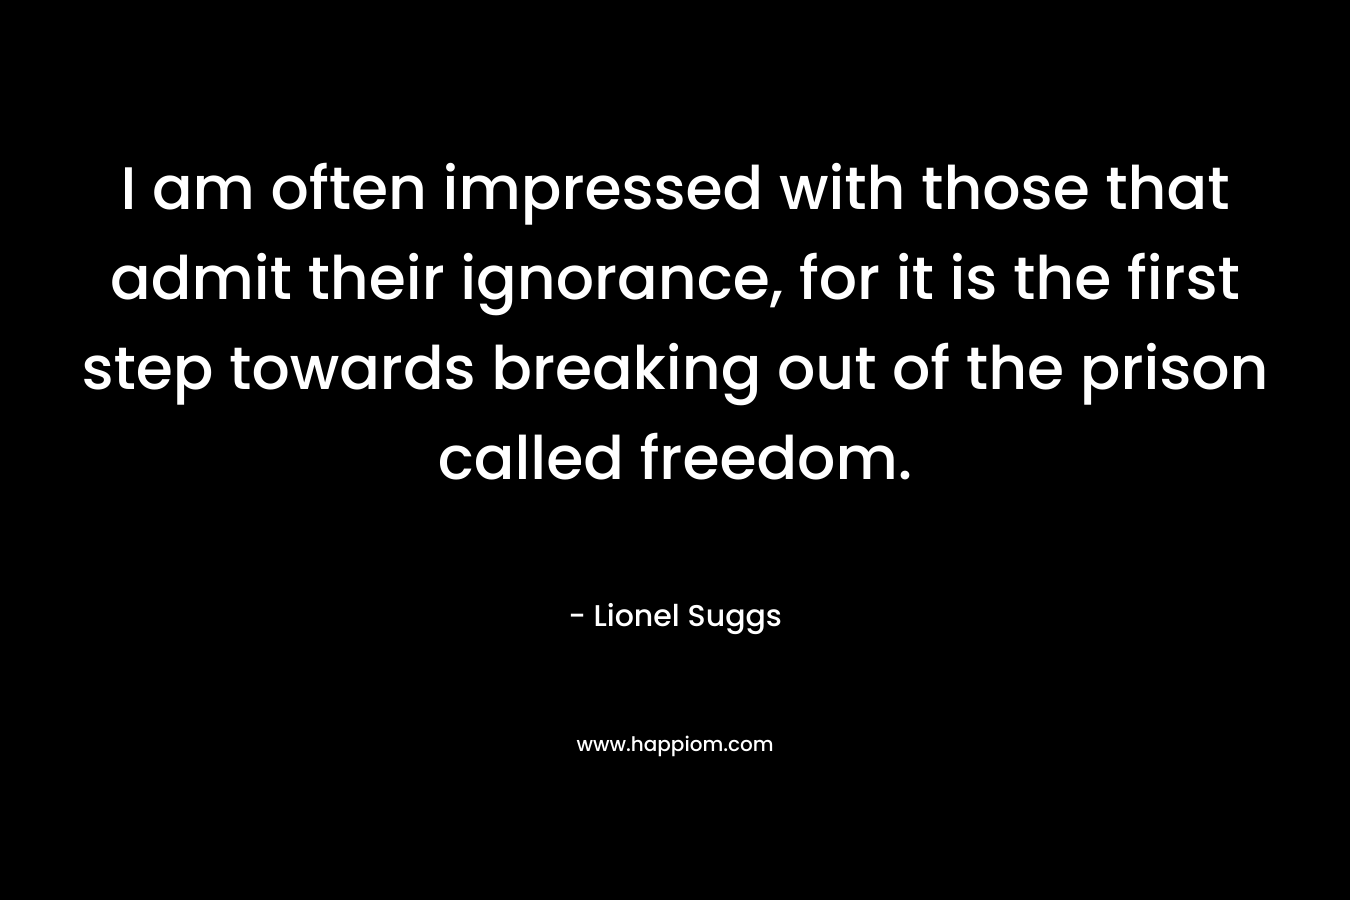 I am often impressed with those that admit their ignorance, for it is the first step towards breaking out of the prison called freedom.